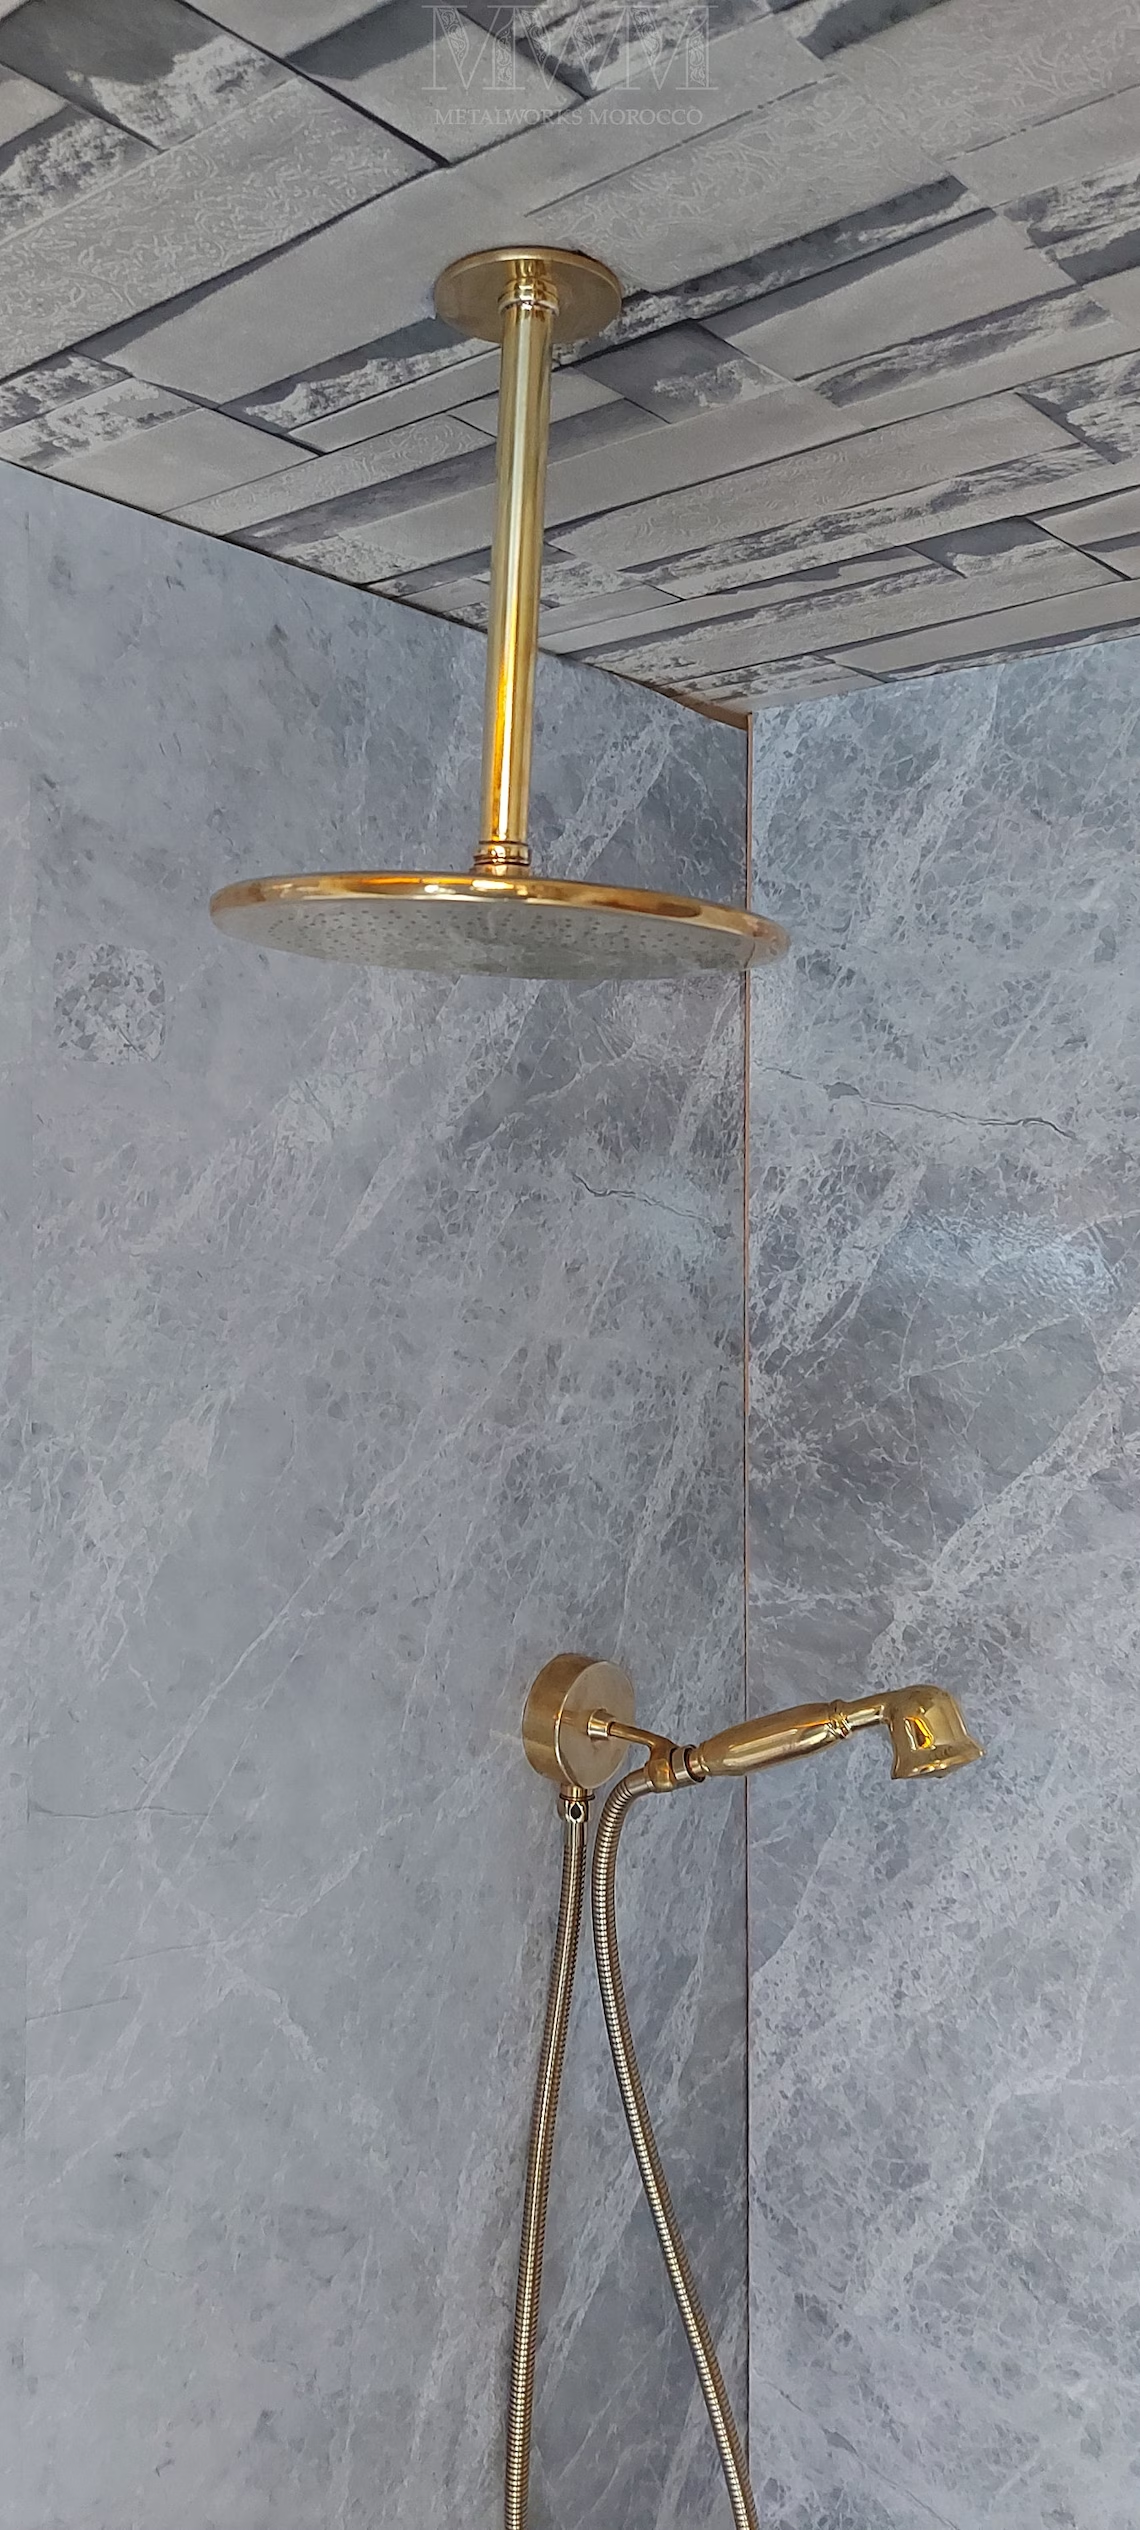 Solid Brass Ceiling Mounted Rain Shower Head With Handheld